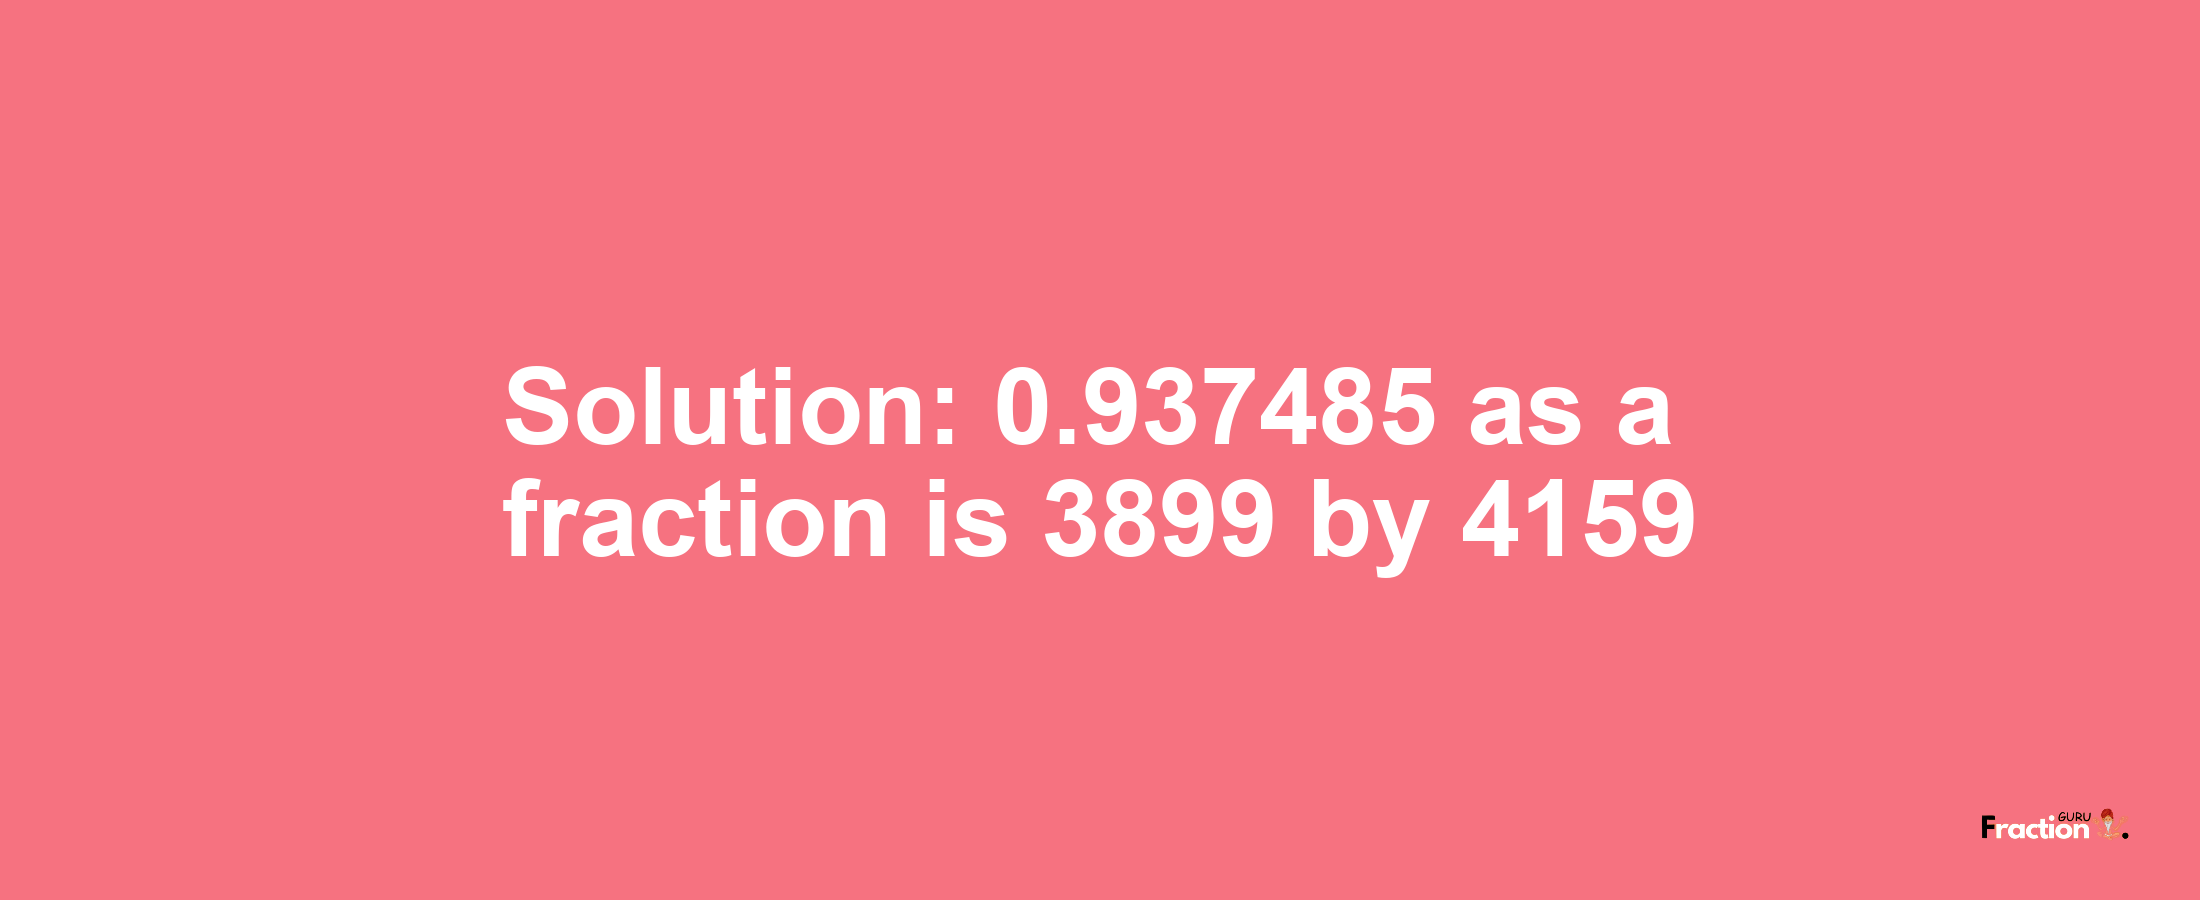 Solution:0.937485 as a fraction is 3899/4159